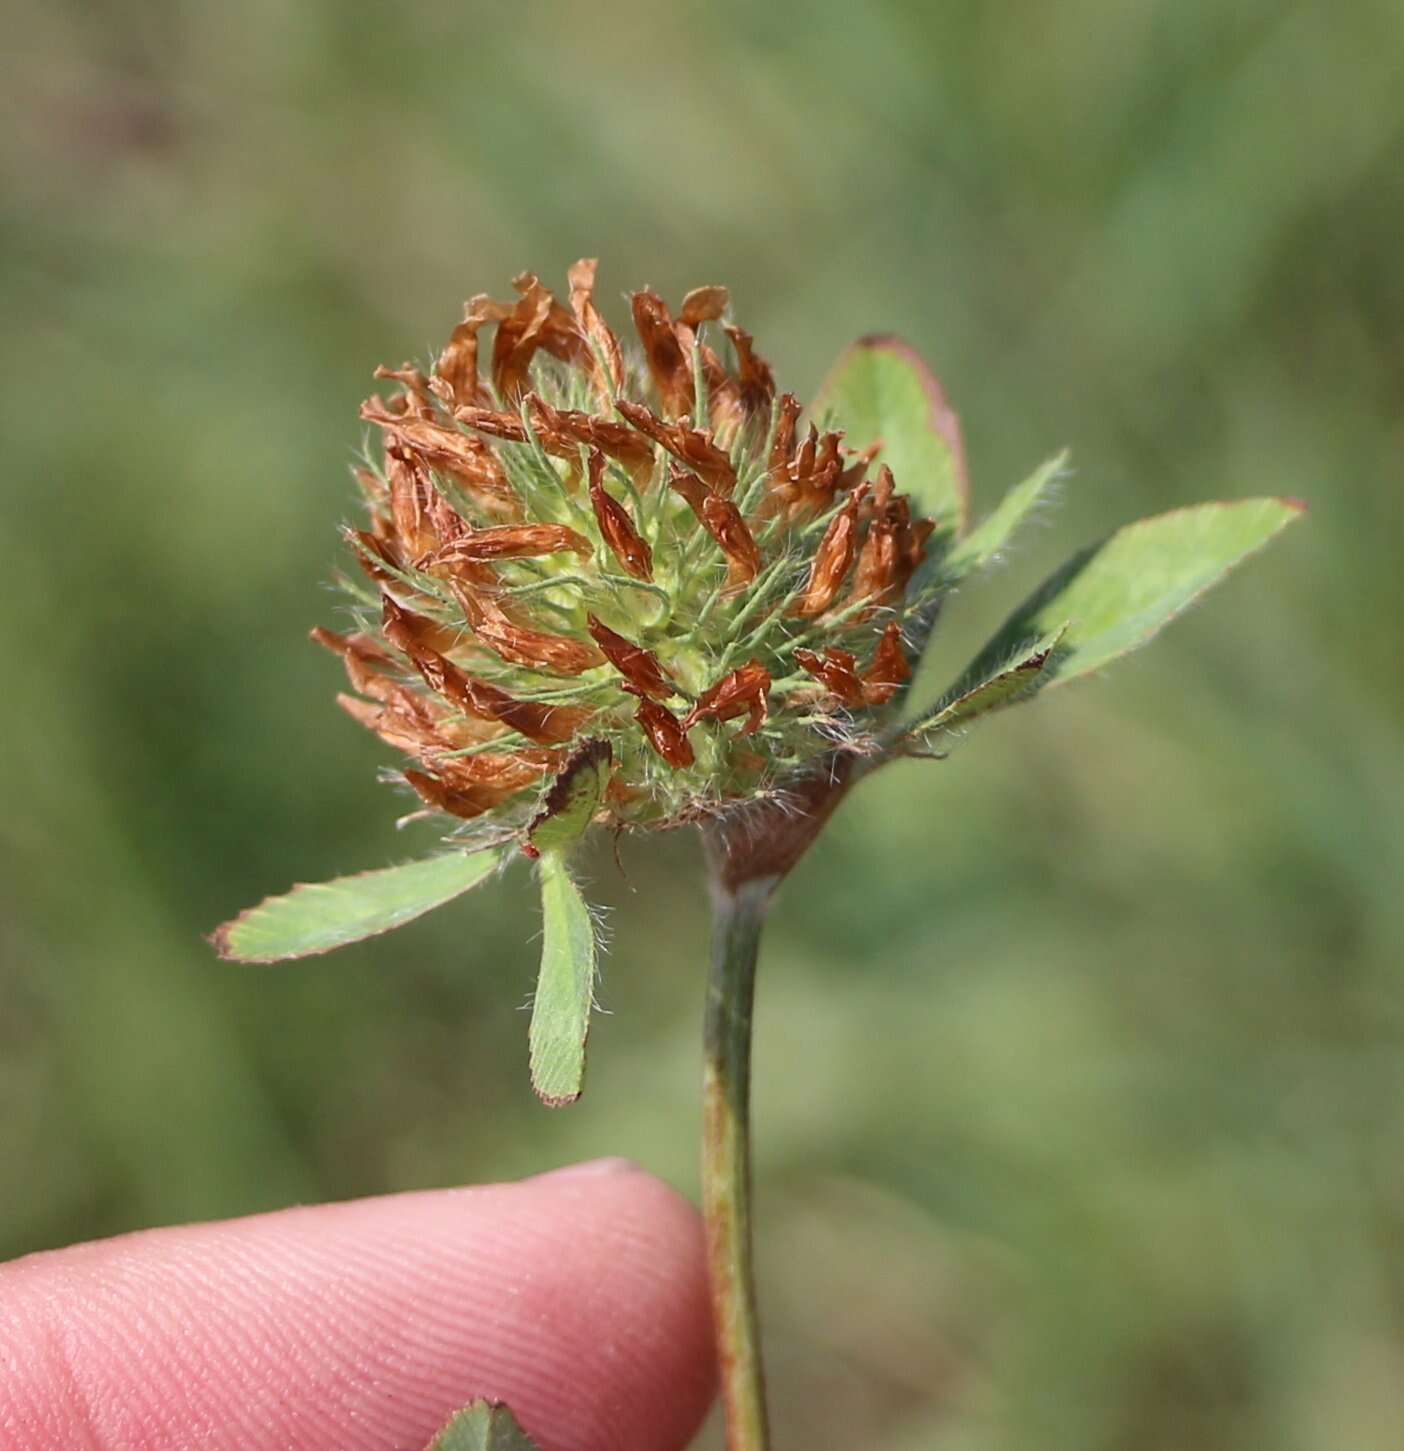 Image of diffuse clover